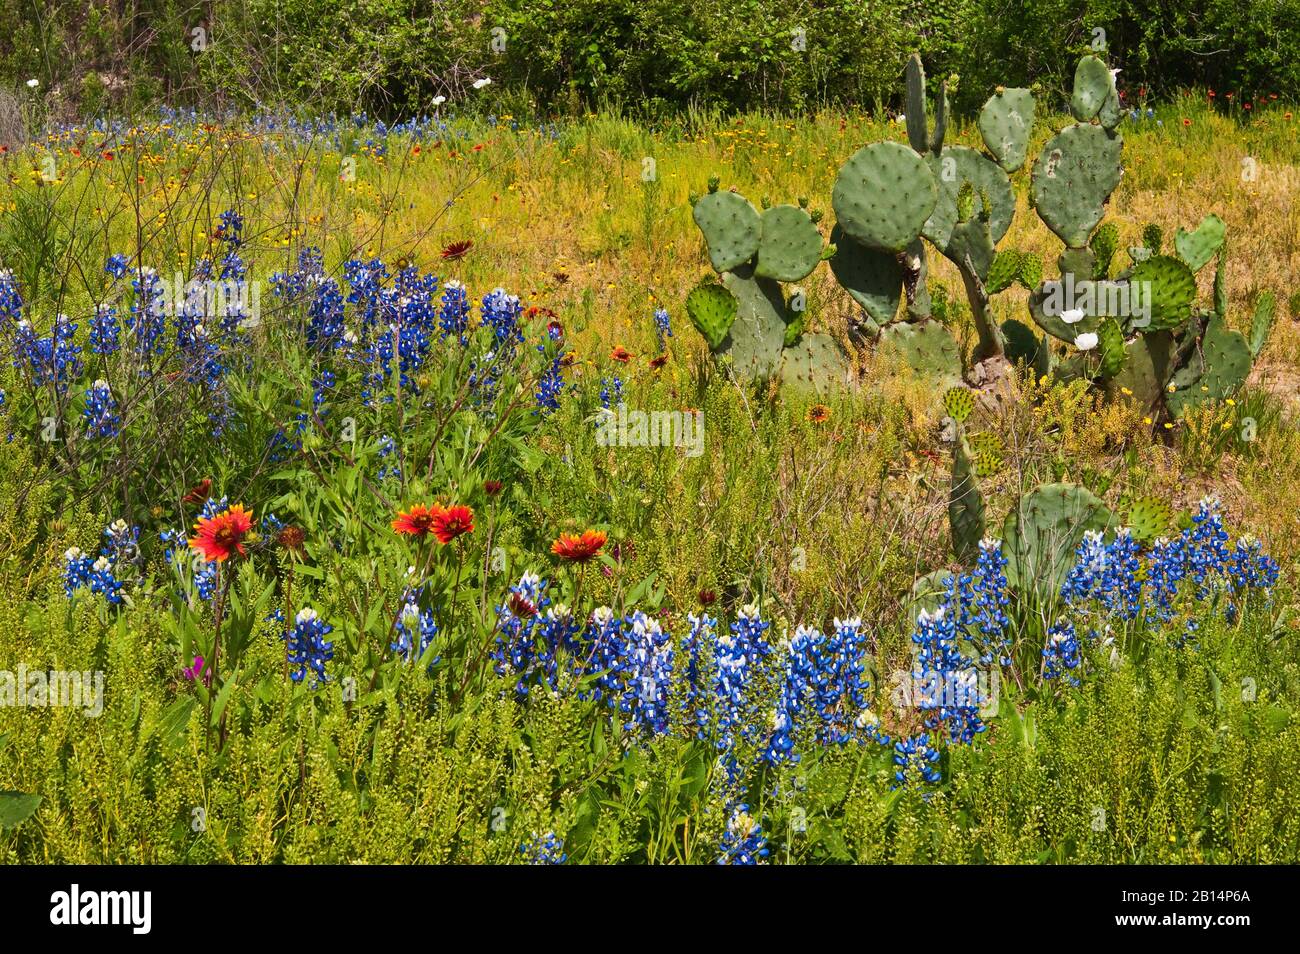 Prickly pear cactus and wildflowers in springtime at Willow City Loop in Hill Country near Fredericksburg, Texas, USA Stock Photo